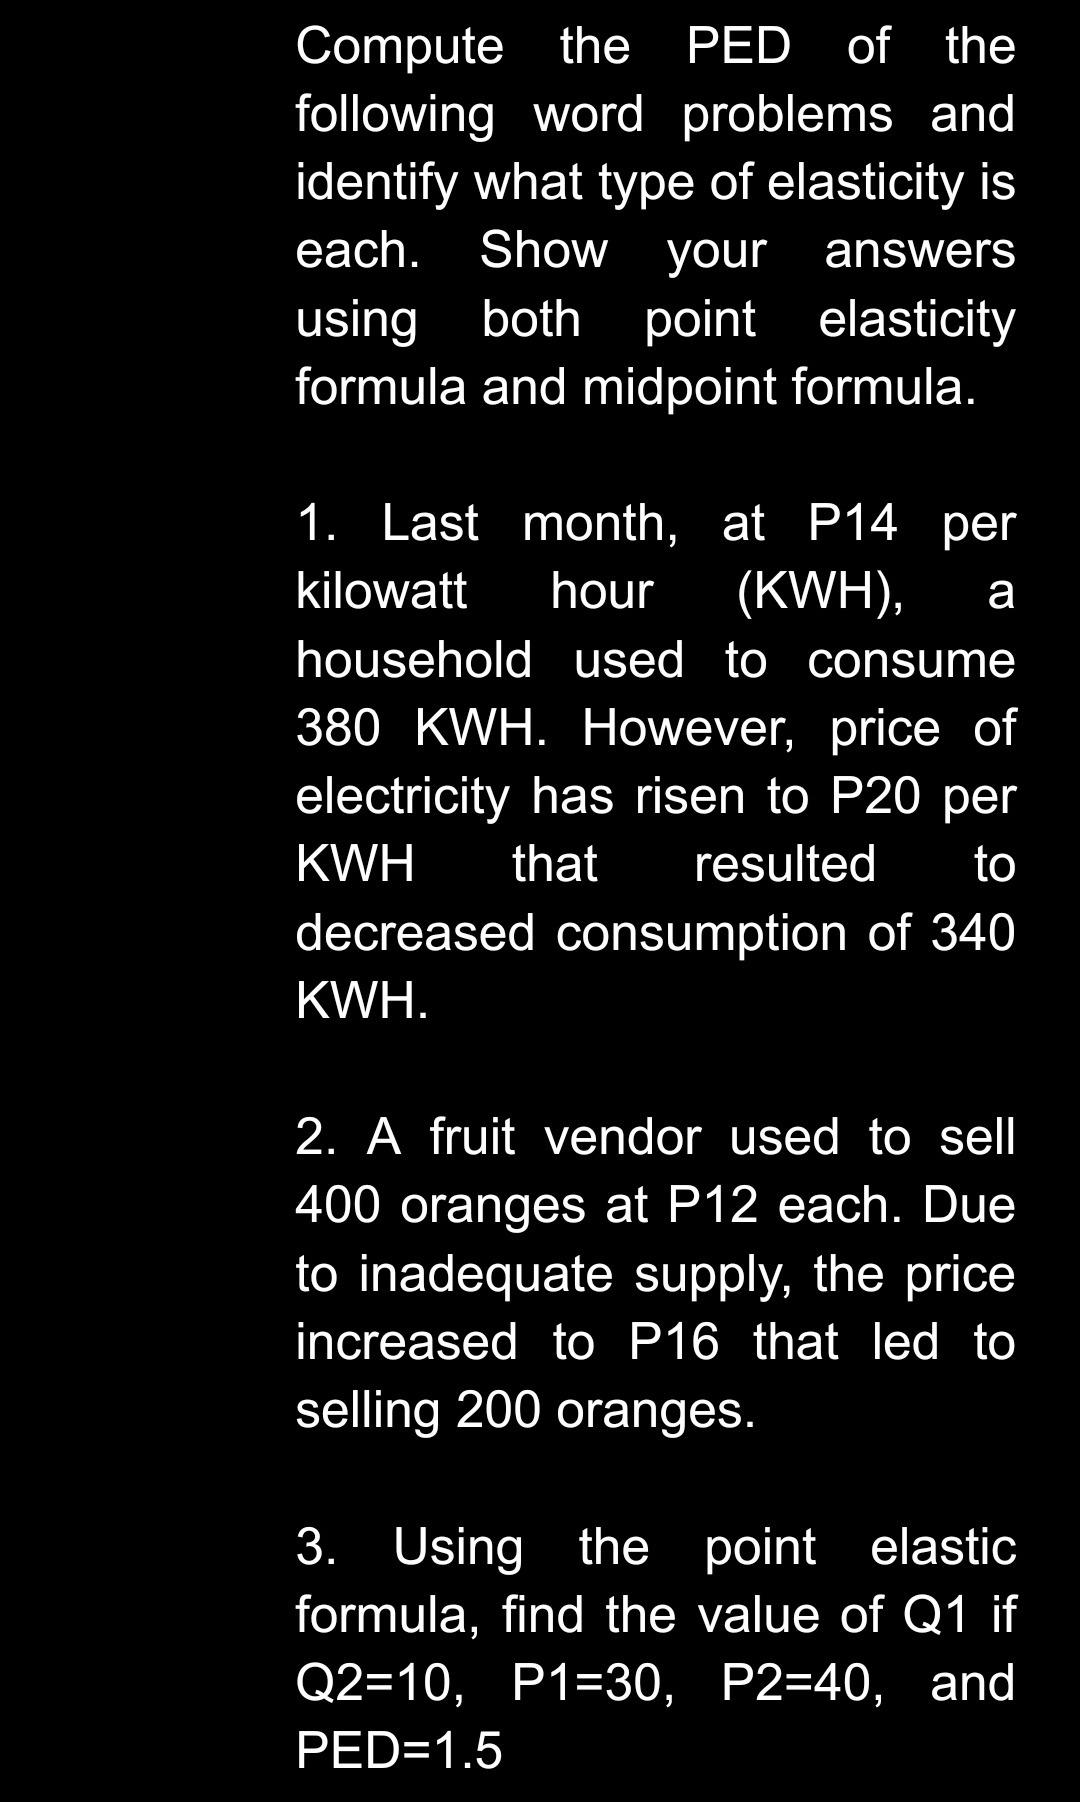 Compute the
following word problems and
identify what type of elasticity is
PED of the
each.
Show your
answers
using both
formula and midpoint formula.
point elasticity
1. Last month, at P14 per
kilowatt
hour
(KWH),
а
household used to consume
380 KWH. However, price of
electricity has risen to P20 per
KWH
that
resulted
to
decreased consumption of 340
KWH.
2. A fruit vendor used to sell
400 oranges at P12 each. Due
to inadequate supply, the price
increased to P16 that led to
selling 200 oranges.
3. Using the point elastic
formula, find the value of Q1 if
Q2=10, P1=30, P2=40, and
PED=1.5
